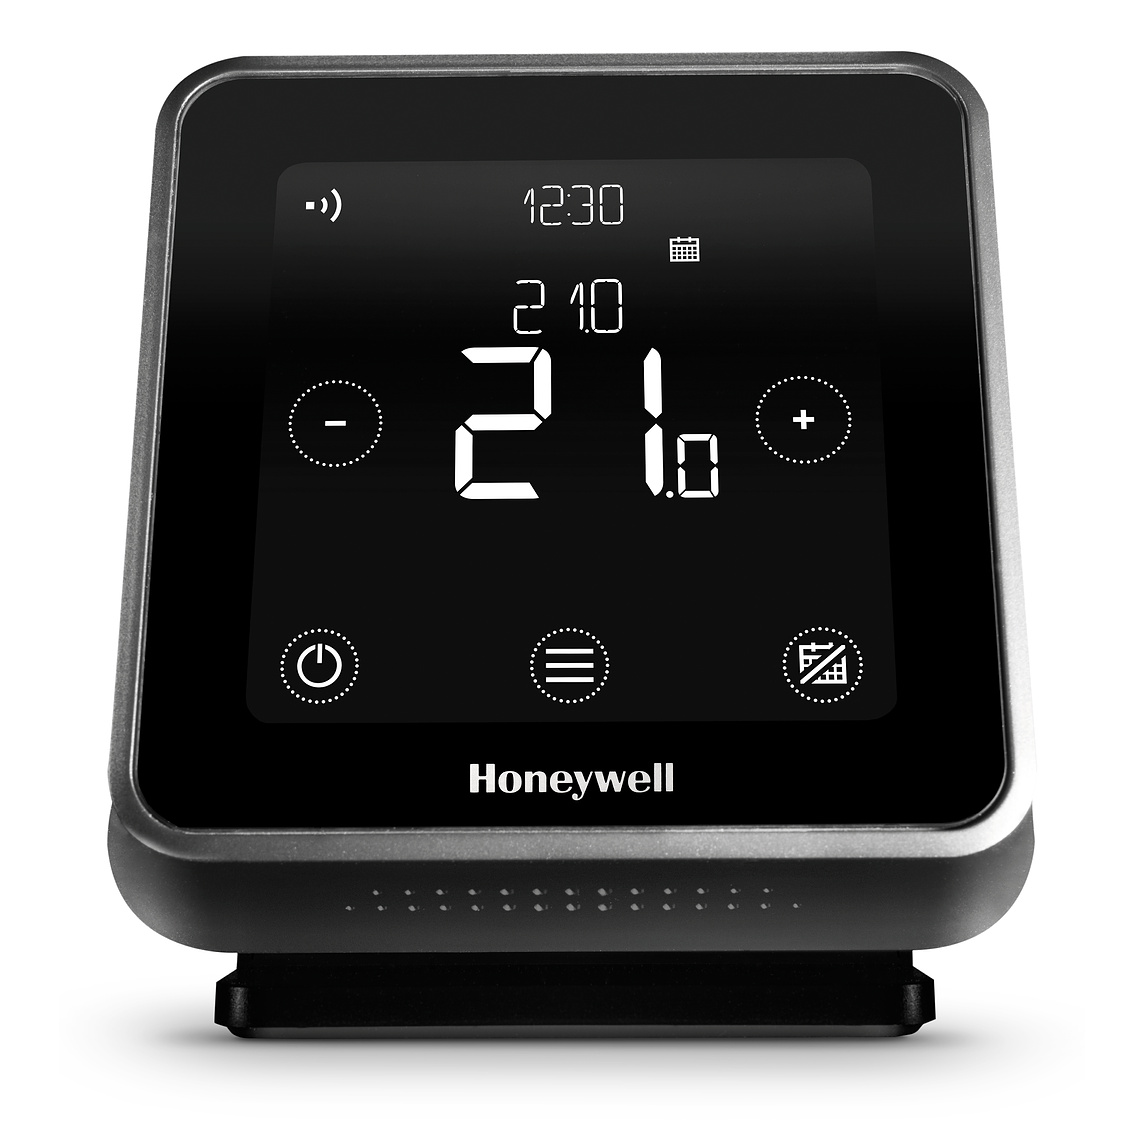 SMART THERMOSTAT DEAL